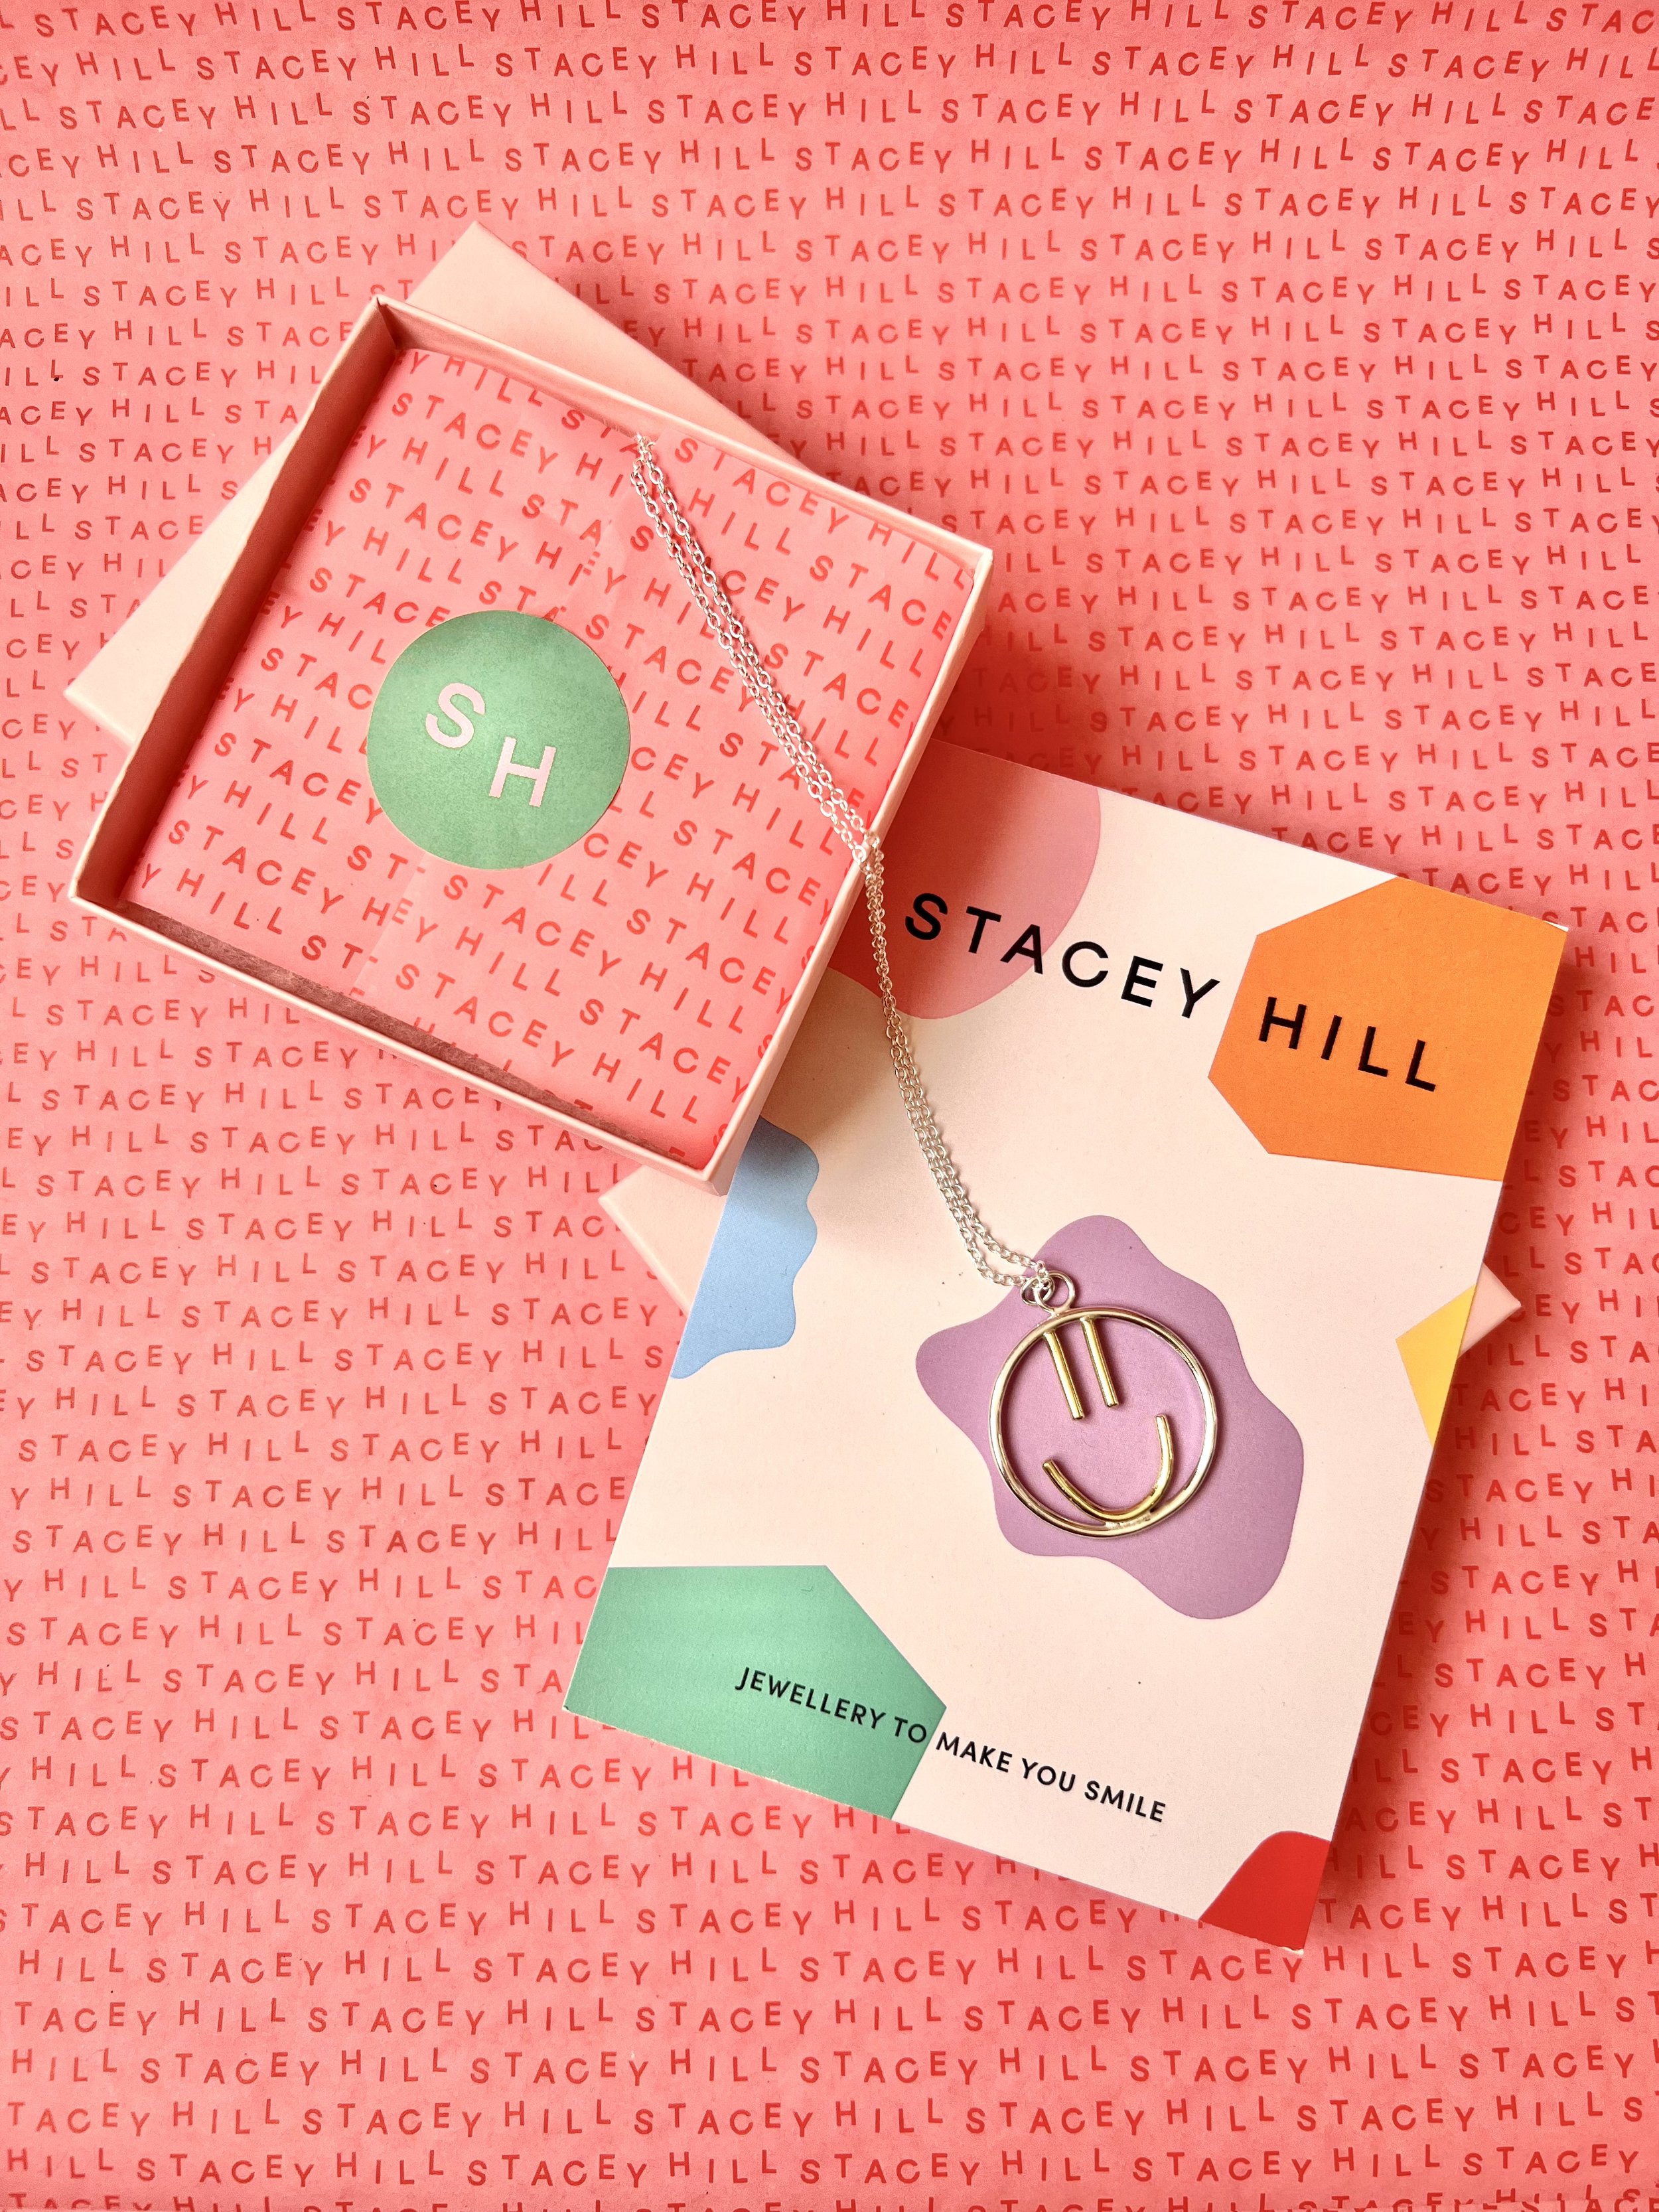  A handmade smiley necklace styled on top of a colourful Stacey Hill flyer and her pink tissue paper. 